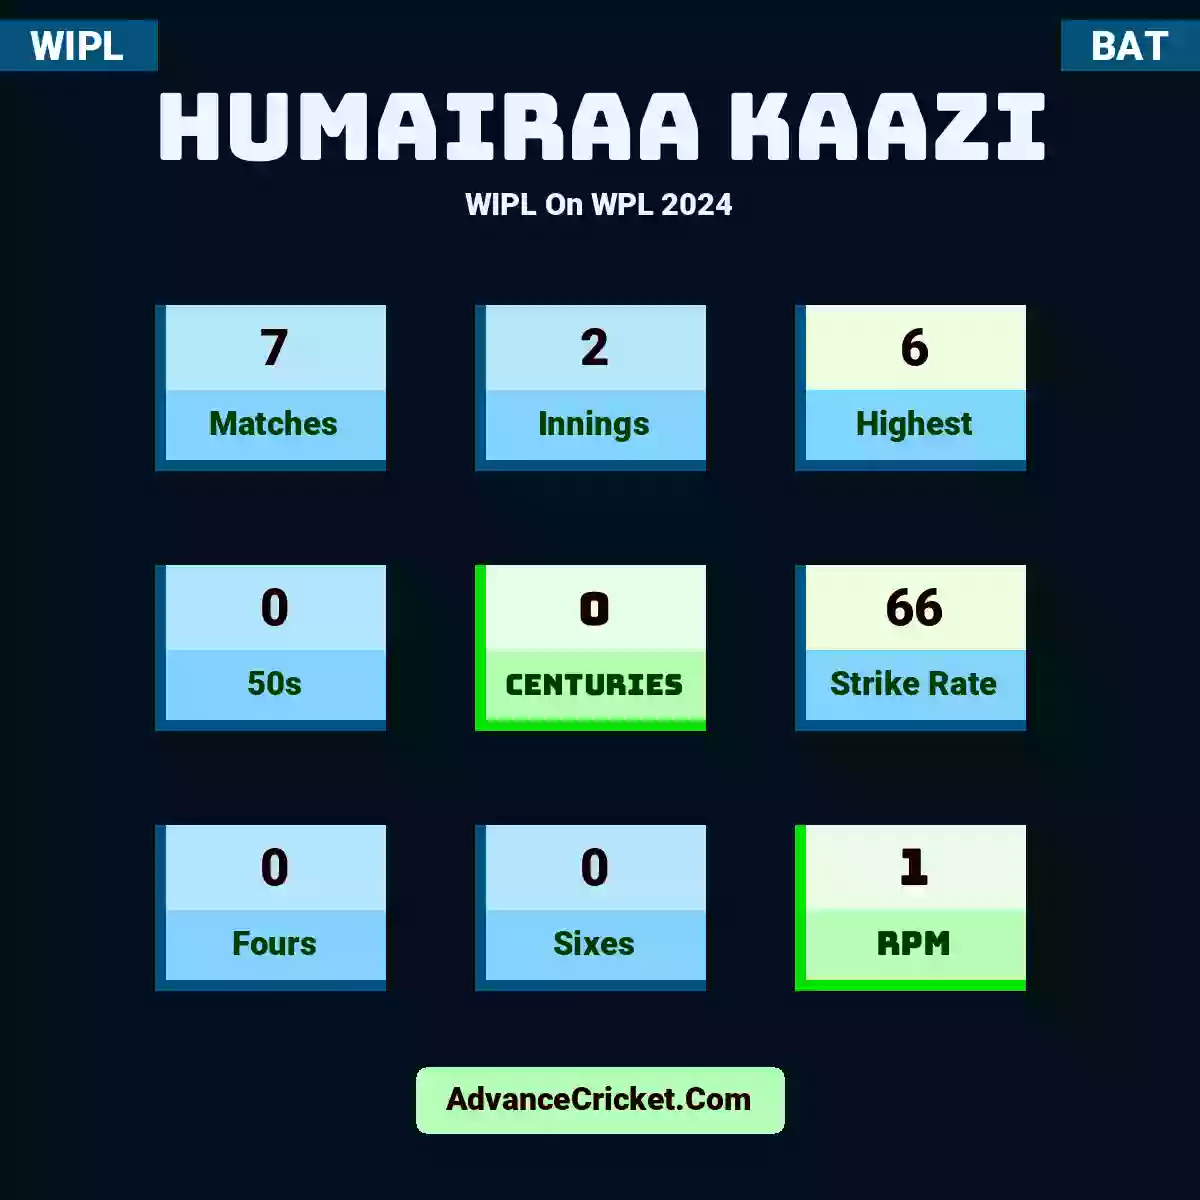 Humairaa Kaazi WIPL  On WPL 2024, Humairaa Kaazi played 7 matches, scored 6 runs as highest, 0 half-centuries, and 0 centuries, with a strike rate of 66. H.Kaazi hit 0 fours and 0 sixes, with an RPM of 1.